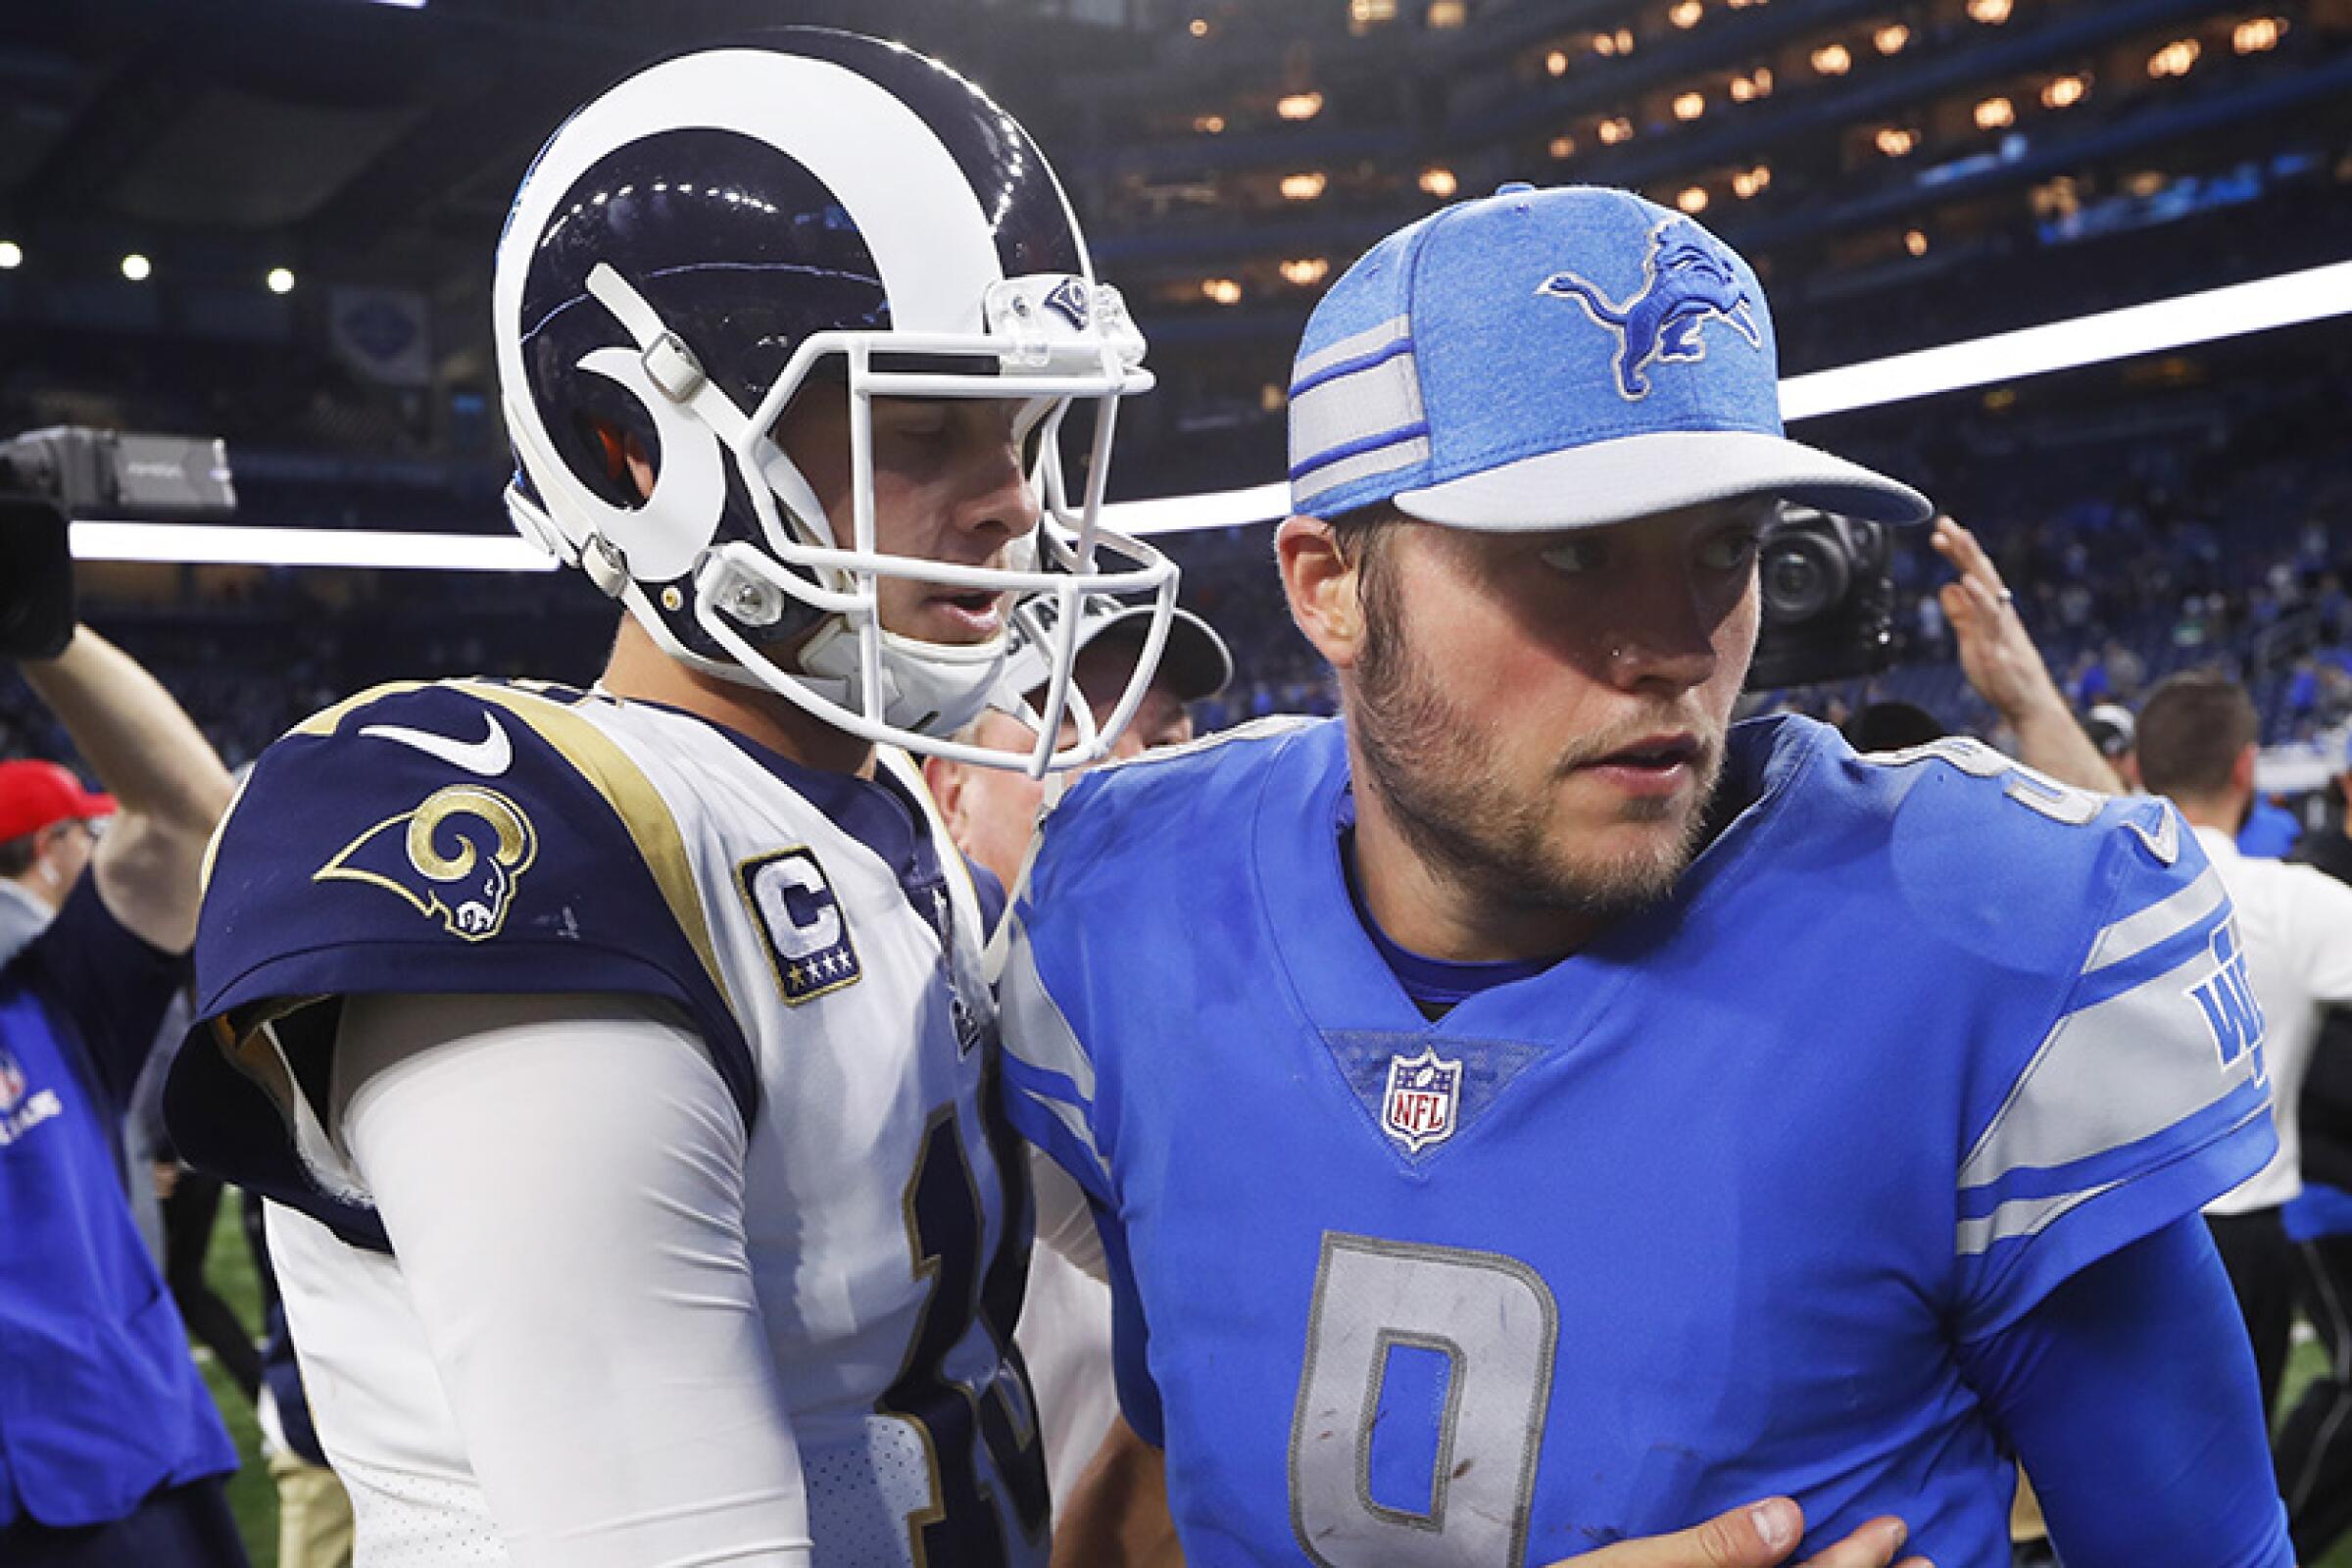 Quarterbacks Jared Goff and Matthew Stafford greet each other after a game in 2018.